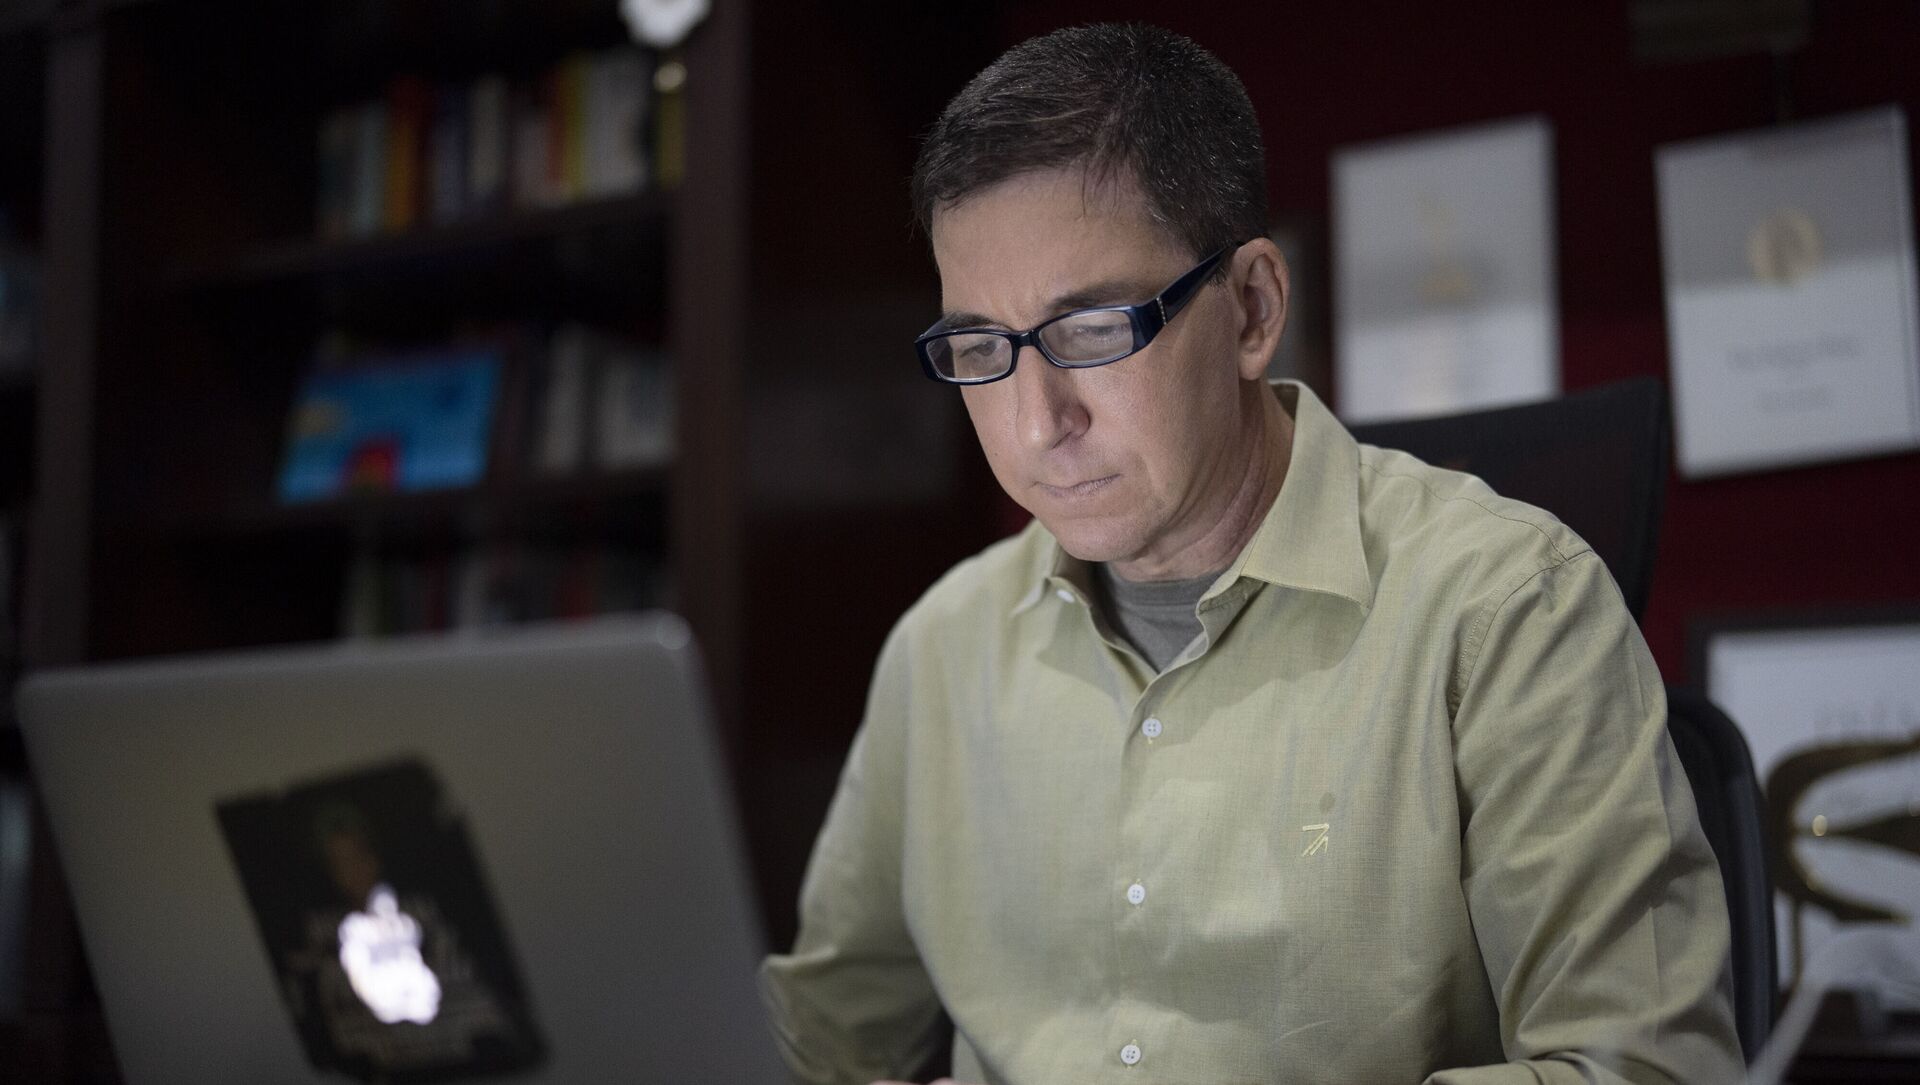 In this July 10, 2019 file photo, U.S. journalist Glenn Greenwald checks his news website at his home in Rio de Janeiro, Brazil. Brazilian prosecutors accused Greenwald on Tuesday, Jan. 21, 2020, of involvement in hacking the phones of Brazilian officials involved in a corruption investigation, though Brazil's high court had blocked investigations of the journalist or his Brazil-based news outlet in relation to the case. - Sputnik International, 1920, 28.04.2021